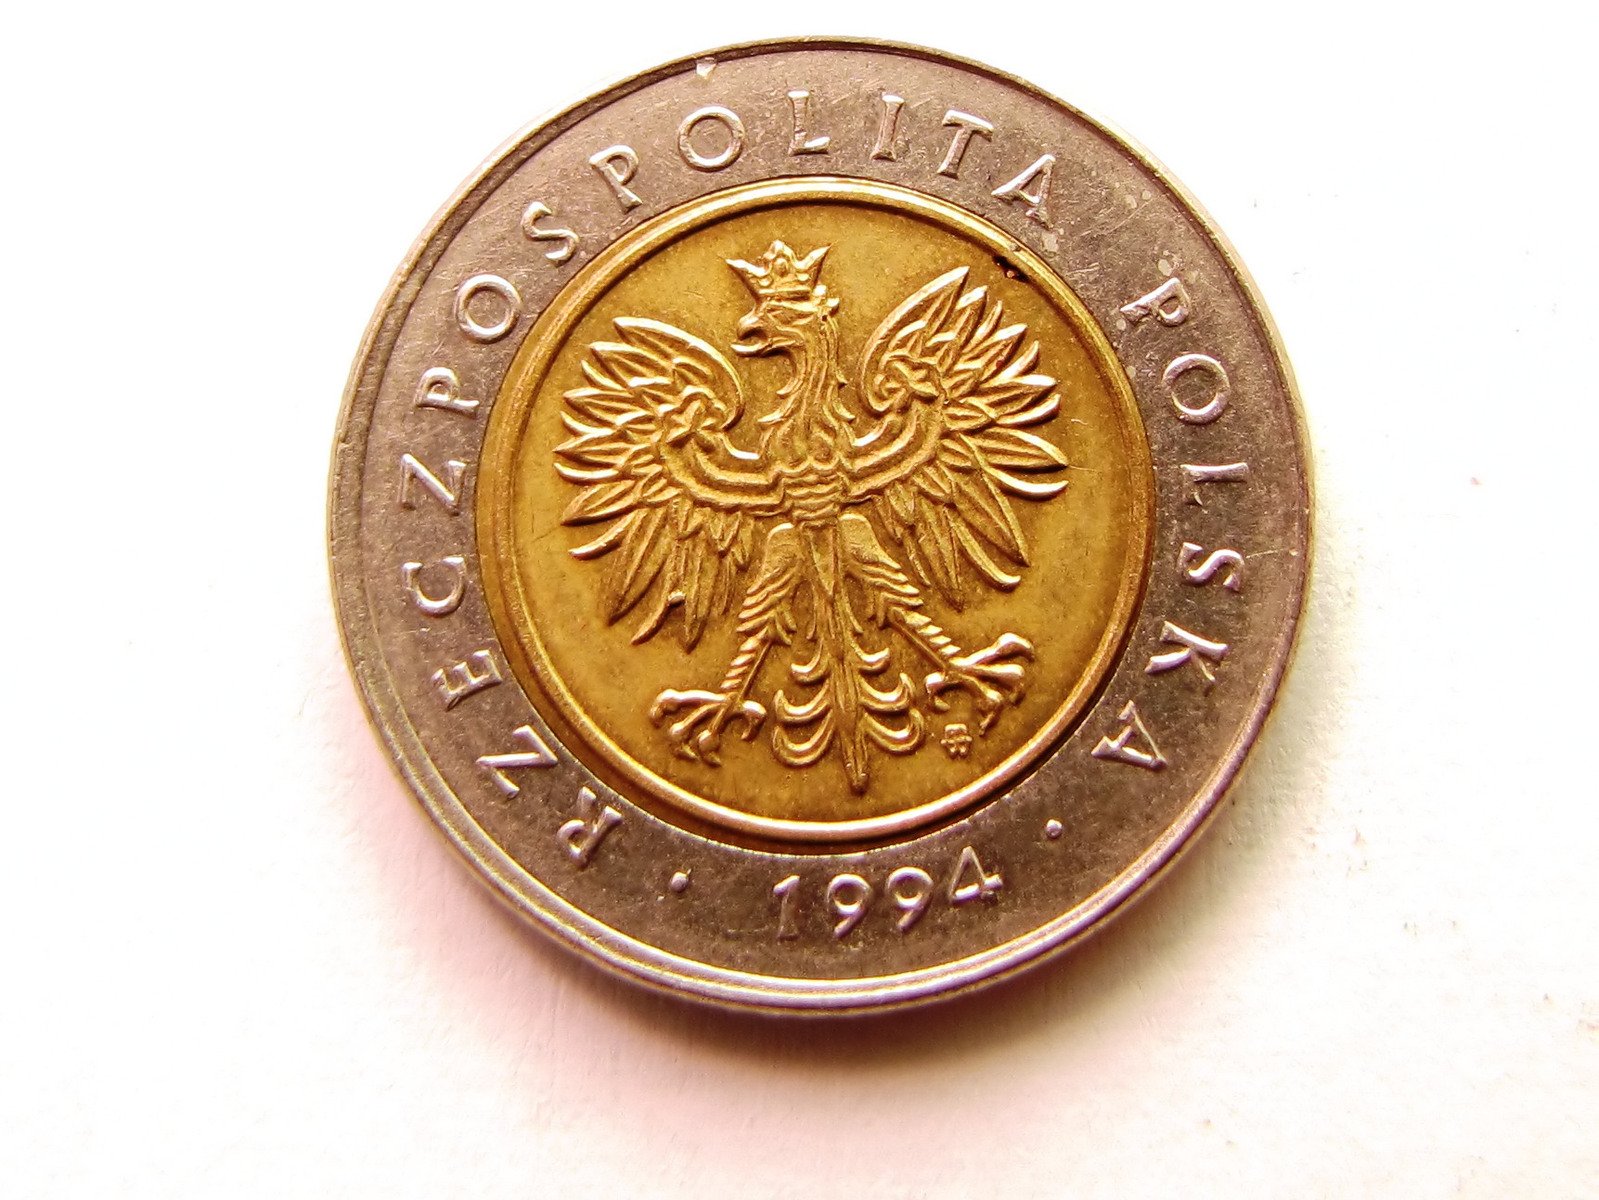 a foreign coin, with the head of an eagle